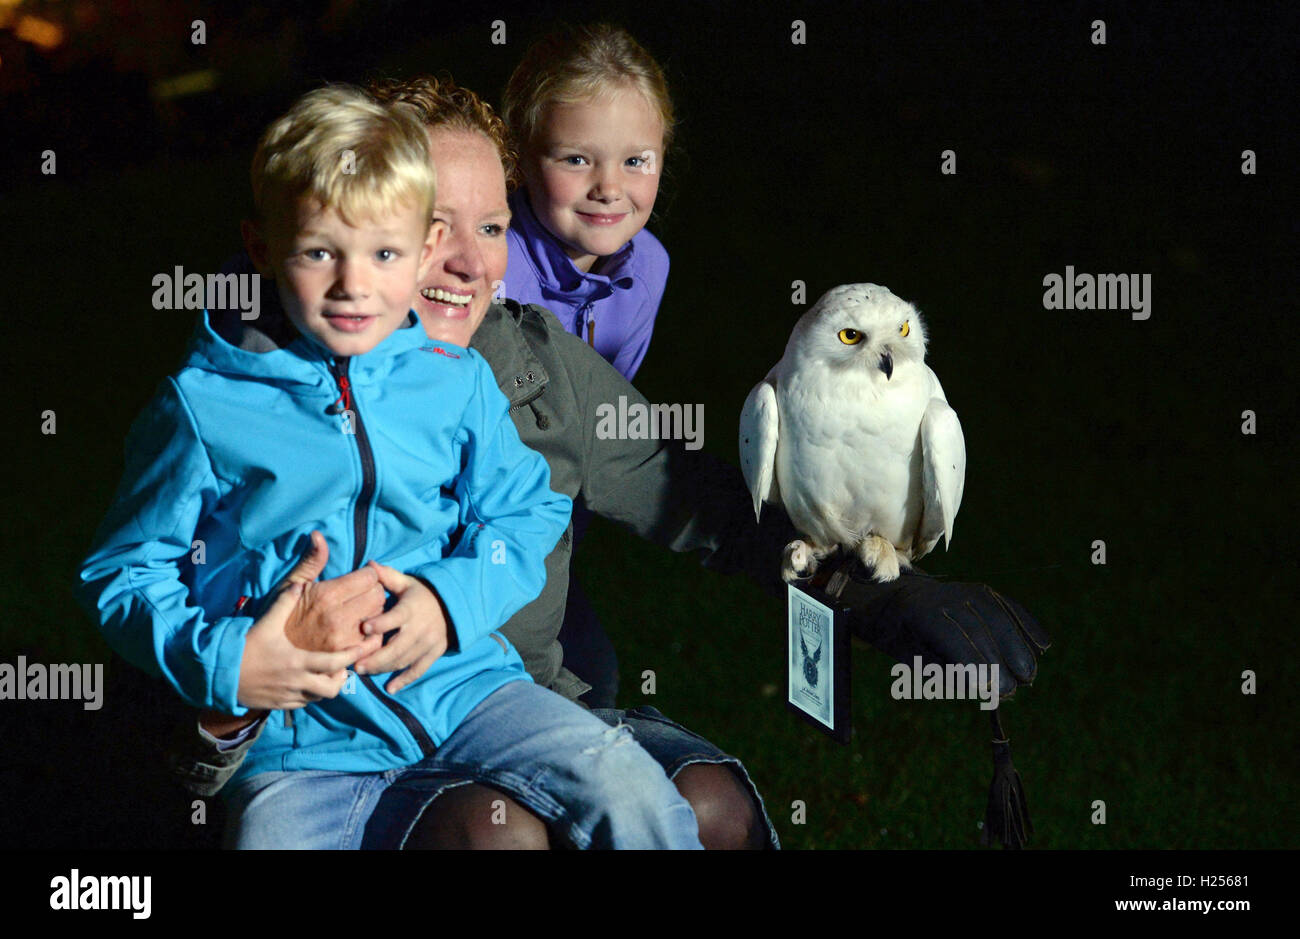 Munich, Germany. 24th Sep, 2016. Snow owl Hedwig sits on the hand of Michaela Schuett with a Kindle eBook reader showing the cover of the new Harry Potter book 'Harry Potter and the Cursed Child' in a garden in Munich, Germany, 24 September 2016. At the stroke of midnight the snow owl brought siblings Noah (5) and Sarah (7) the continuation of Harry Potter. Amazon shipping company randomly picked the family for the special delivery method. Photo: ANDREAS GEBERT/dpa/Alamy Live News Stock Photo